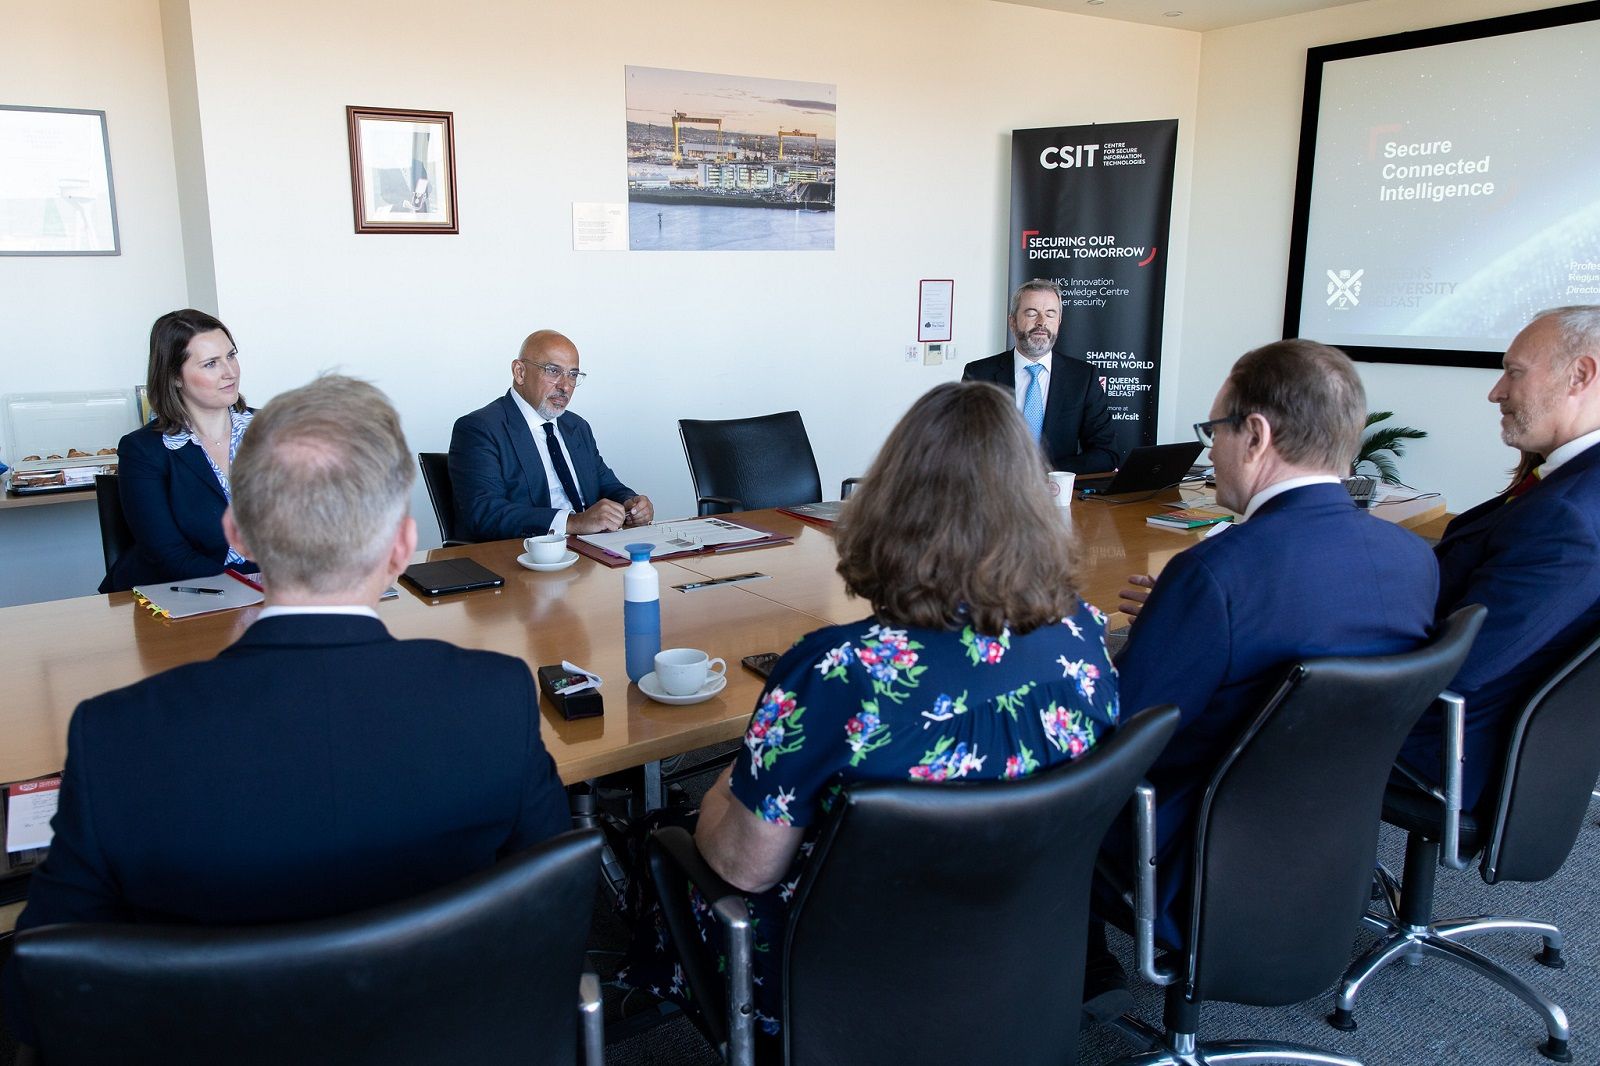 Nadhim Zahawi at ECIT roundtable with reps, Queen's staff